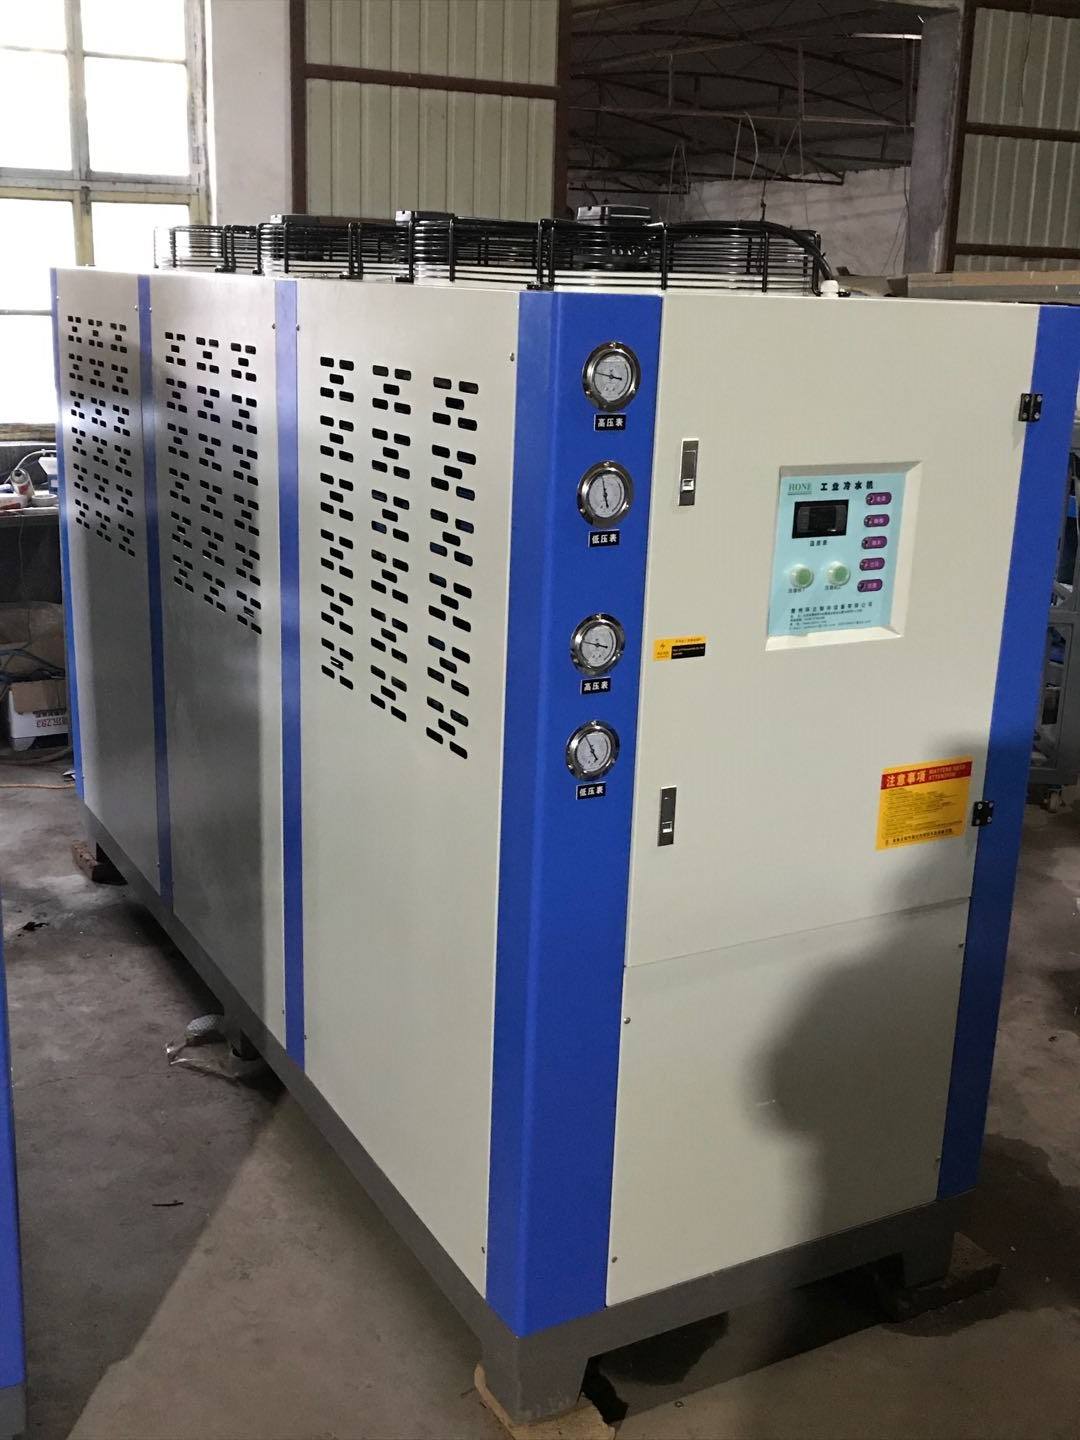 Industrial Air Cooled Water Chiller System Cooling